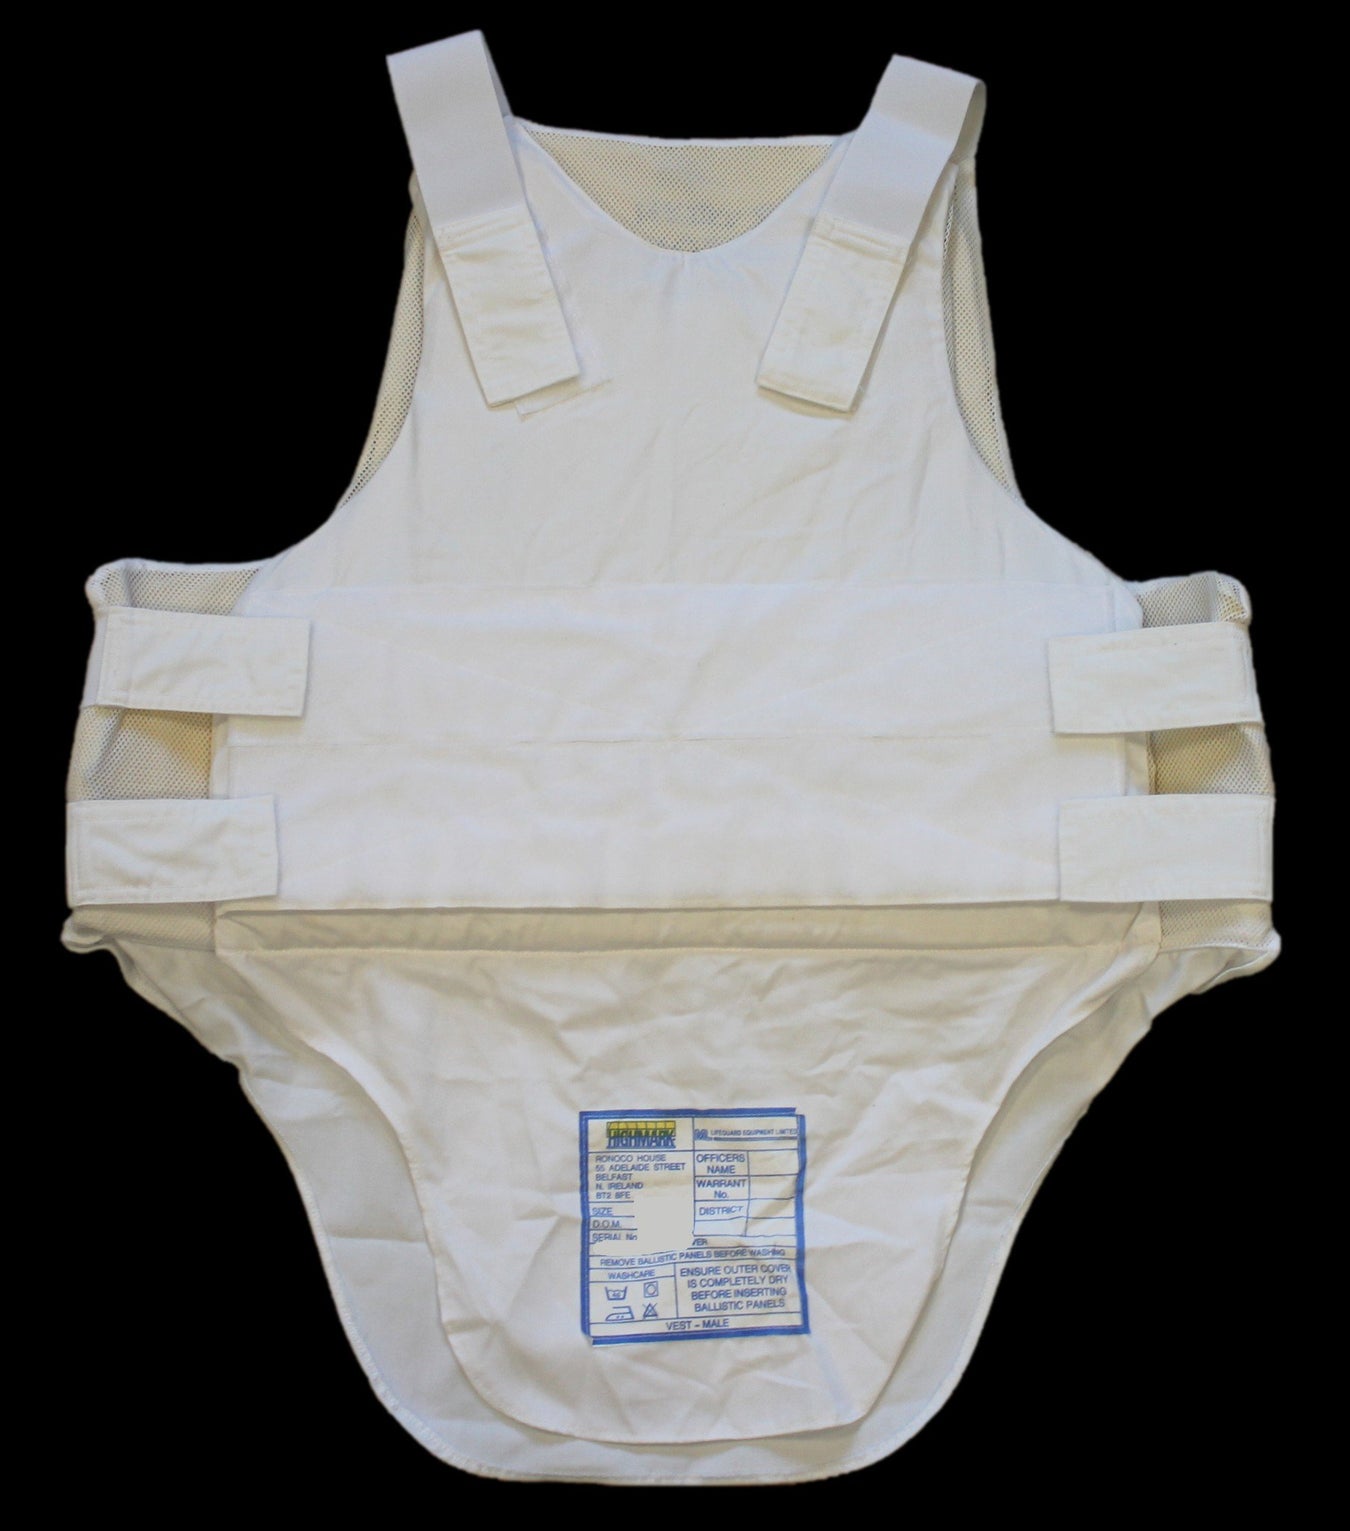 Covert Body Armour Covers